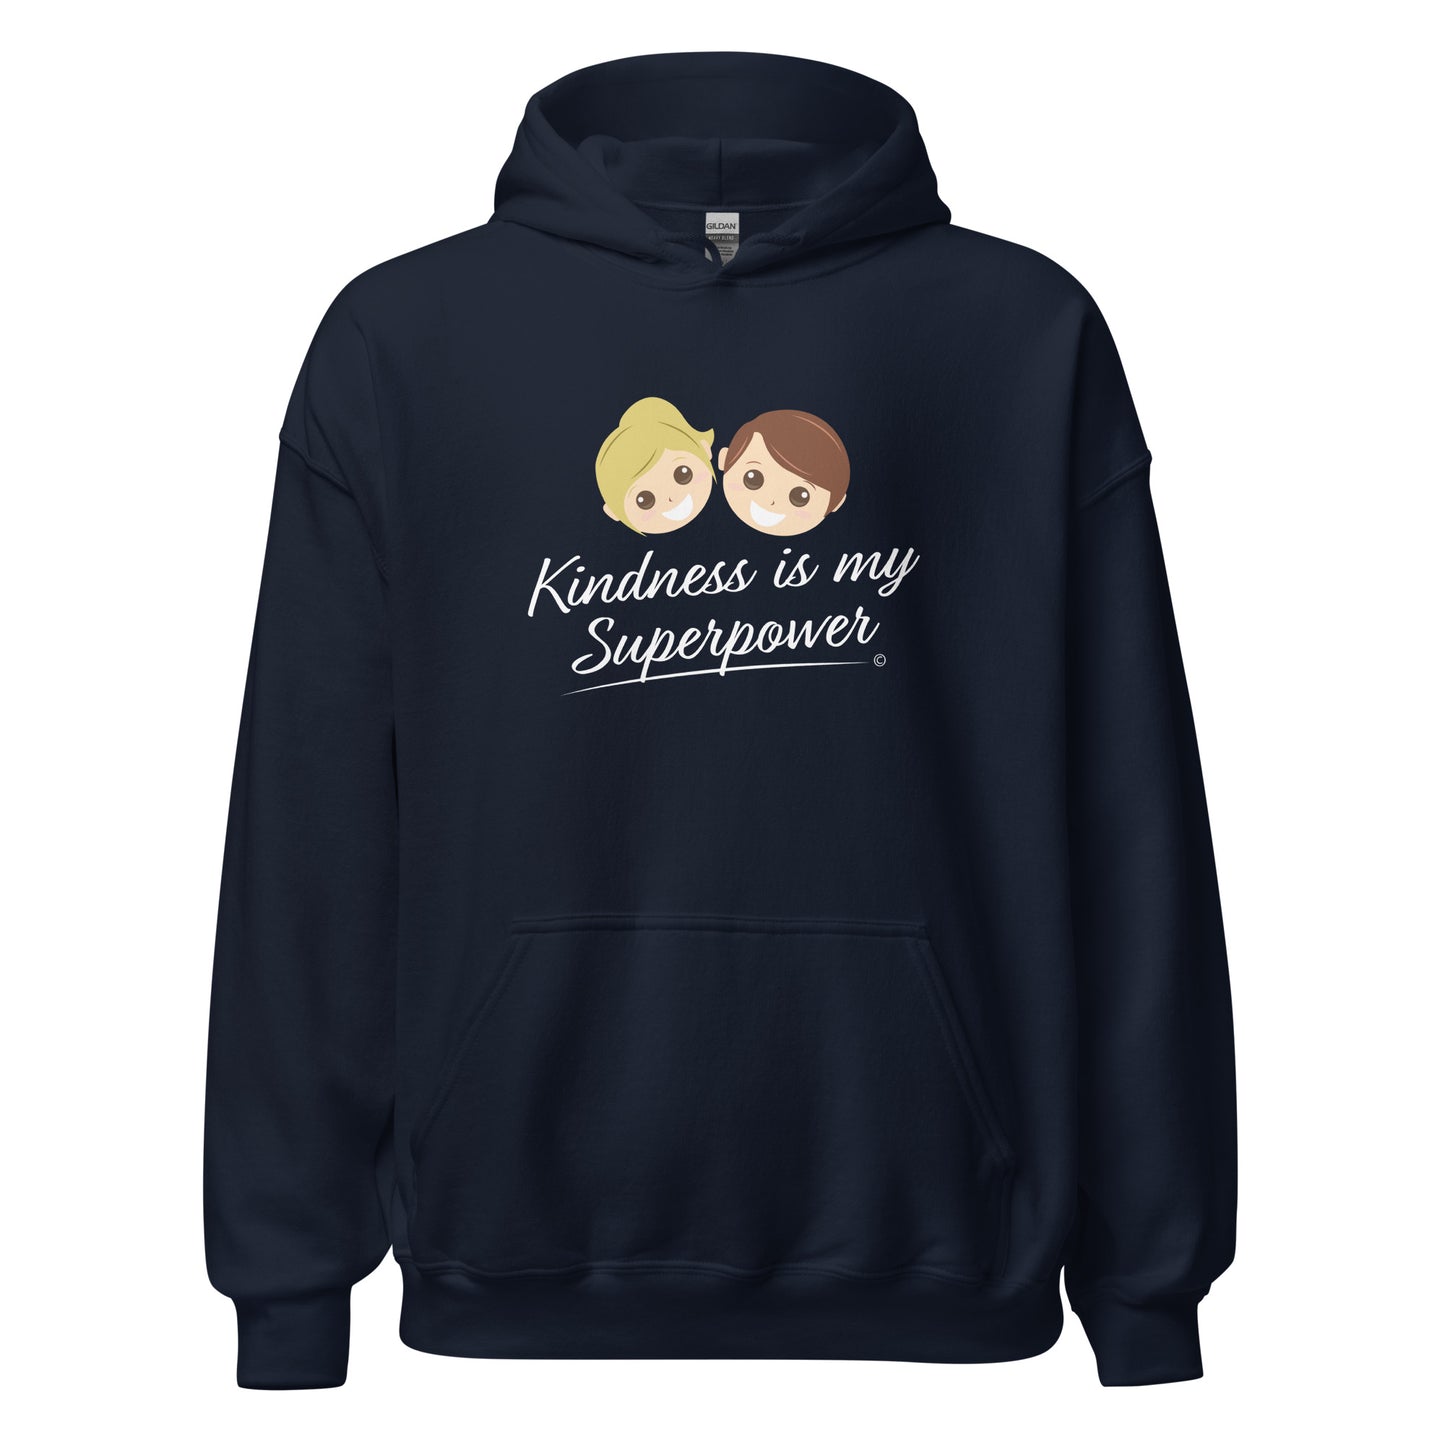 A cozy unisex hoodie in navy featuring the uplifting quote 'Kindness is my Superpower' in bold lettering.